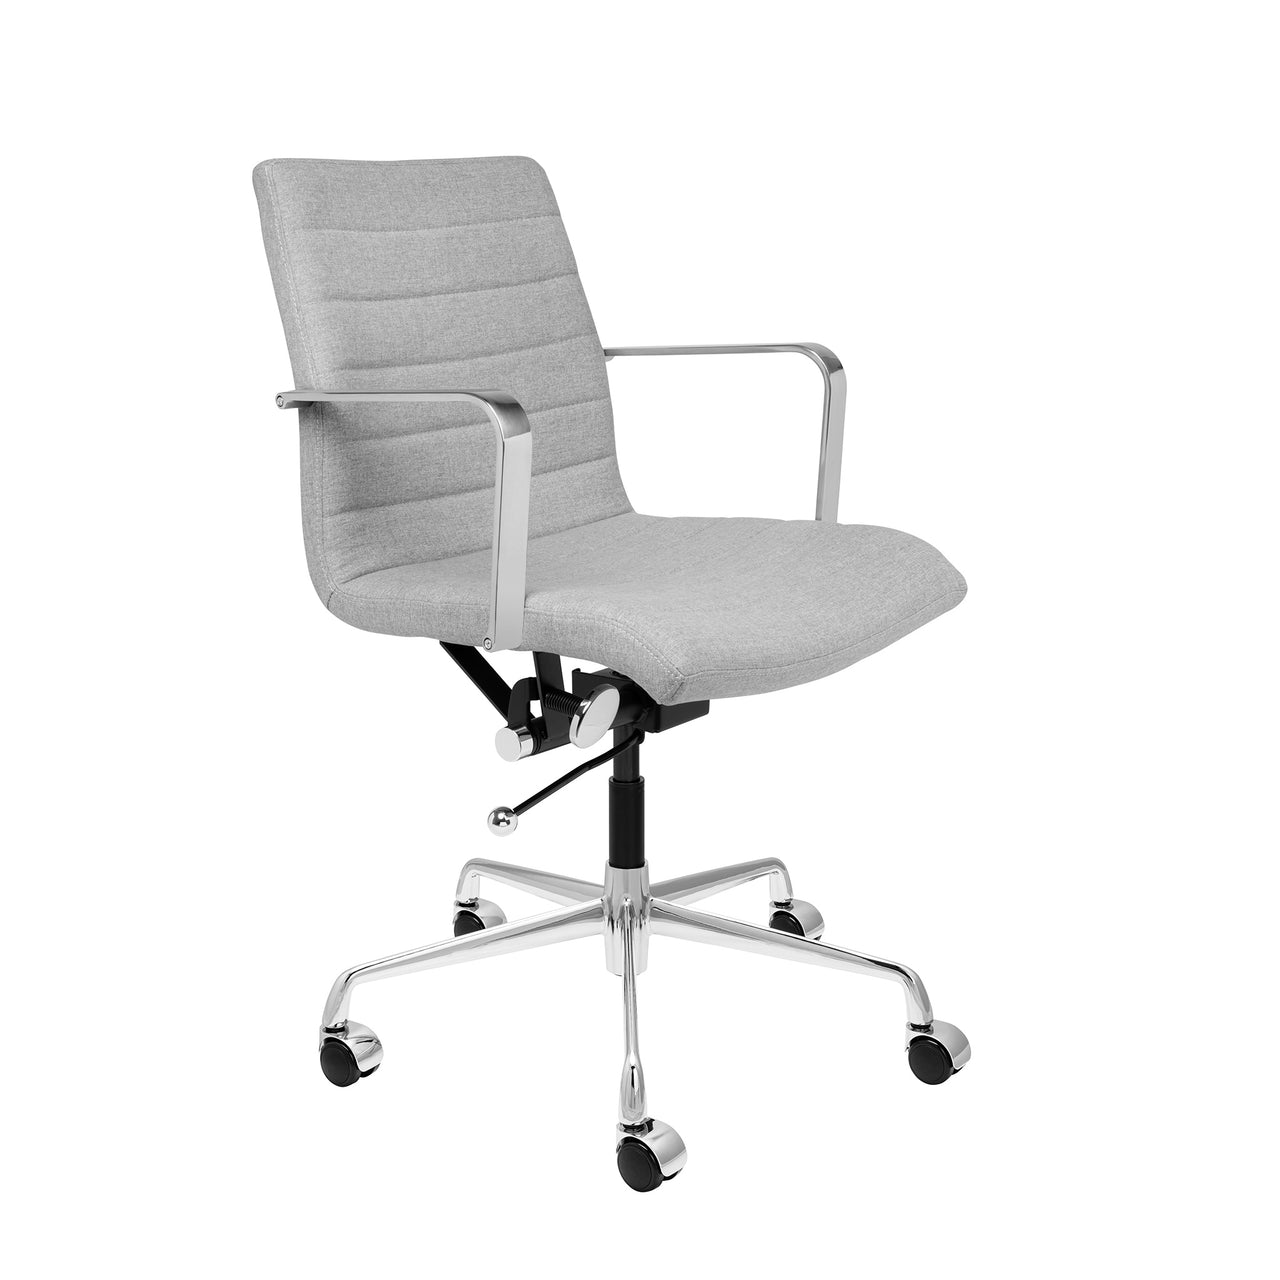 SHIPS JULY 30TH - SOHO II Ribbed Management Chair (Grey Fabric)